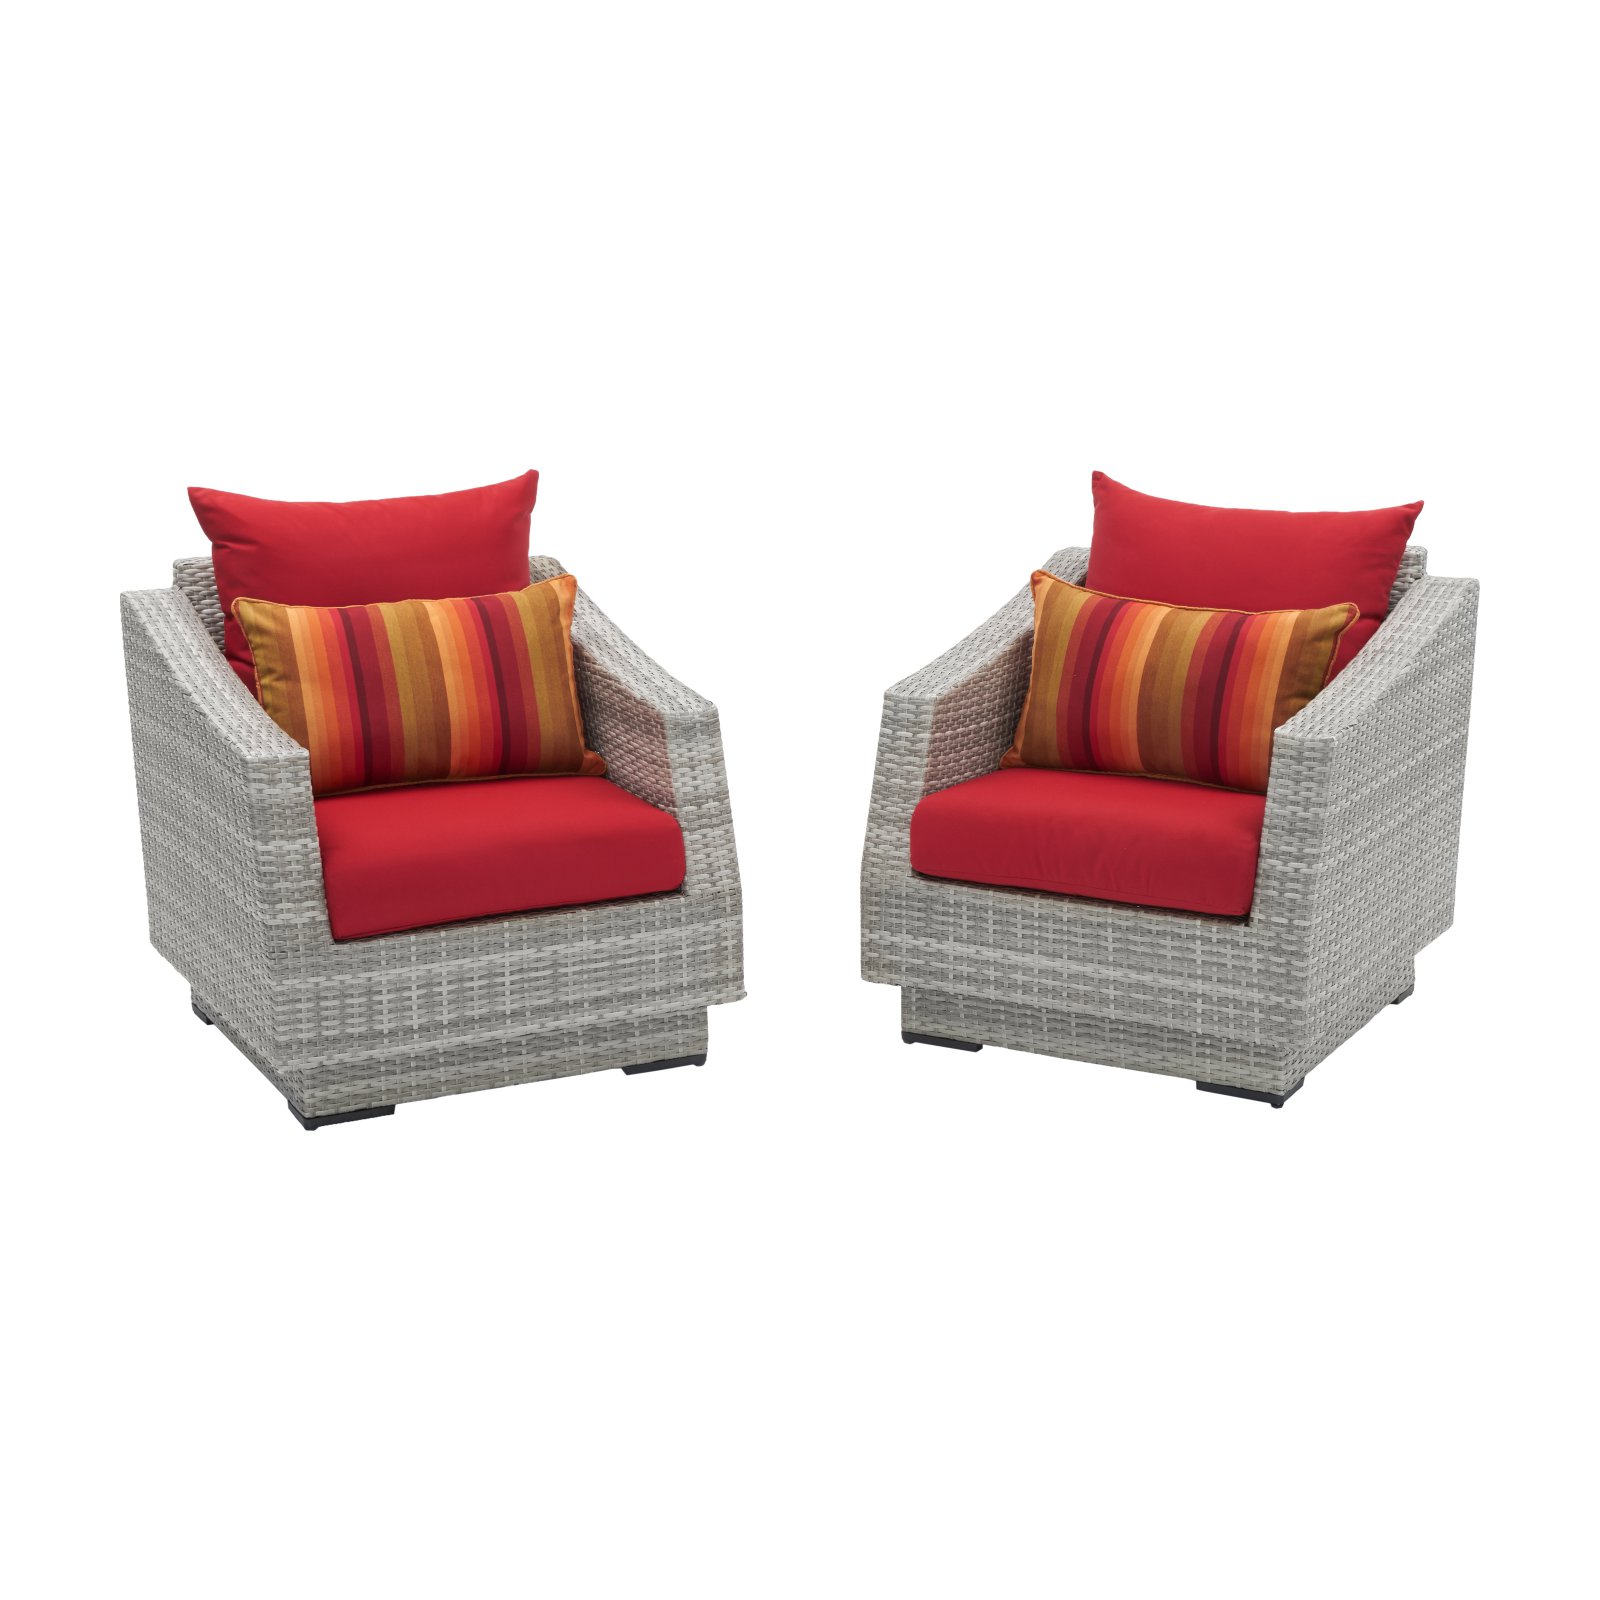 RST Brands Cannes Sunbrella Club Chair - Set of 2 - image 1 of 11